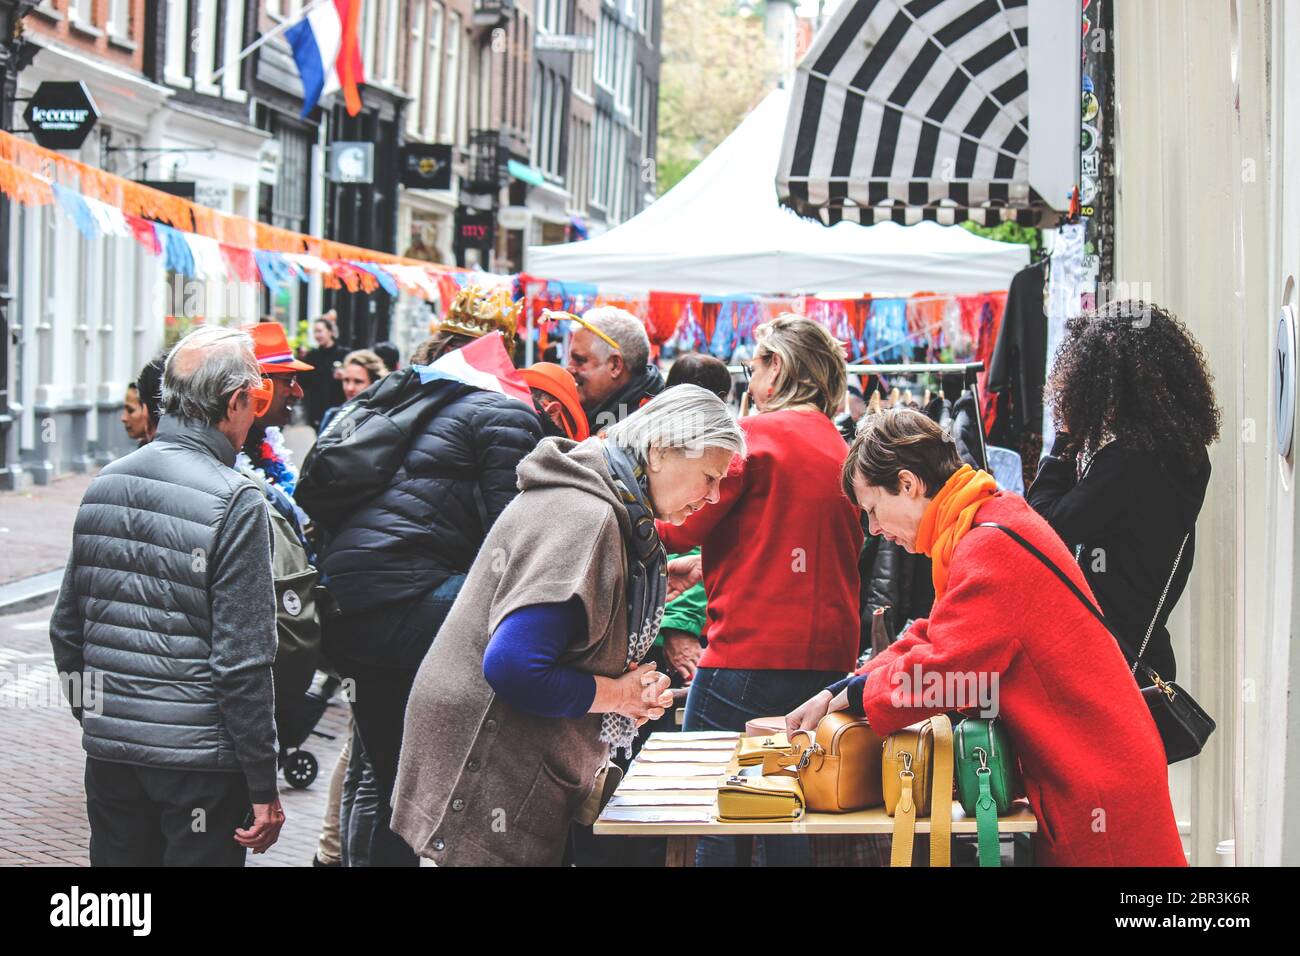 Amsterdam, Netherlands - April 27, 2019: People buying and selling on the traditional flea market during the Kings day, Koningsdag. Streets decorated with Dutch flags and national colors. Stock Photo